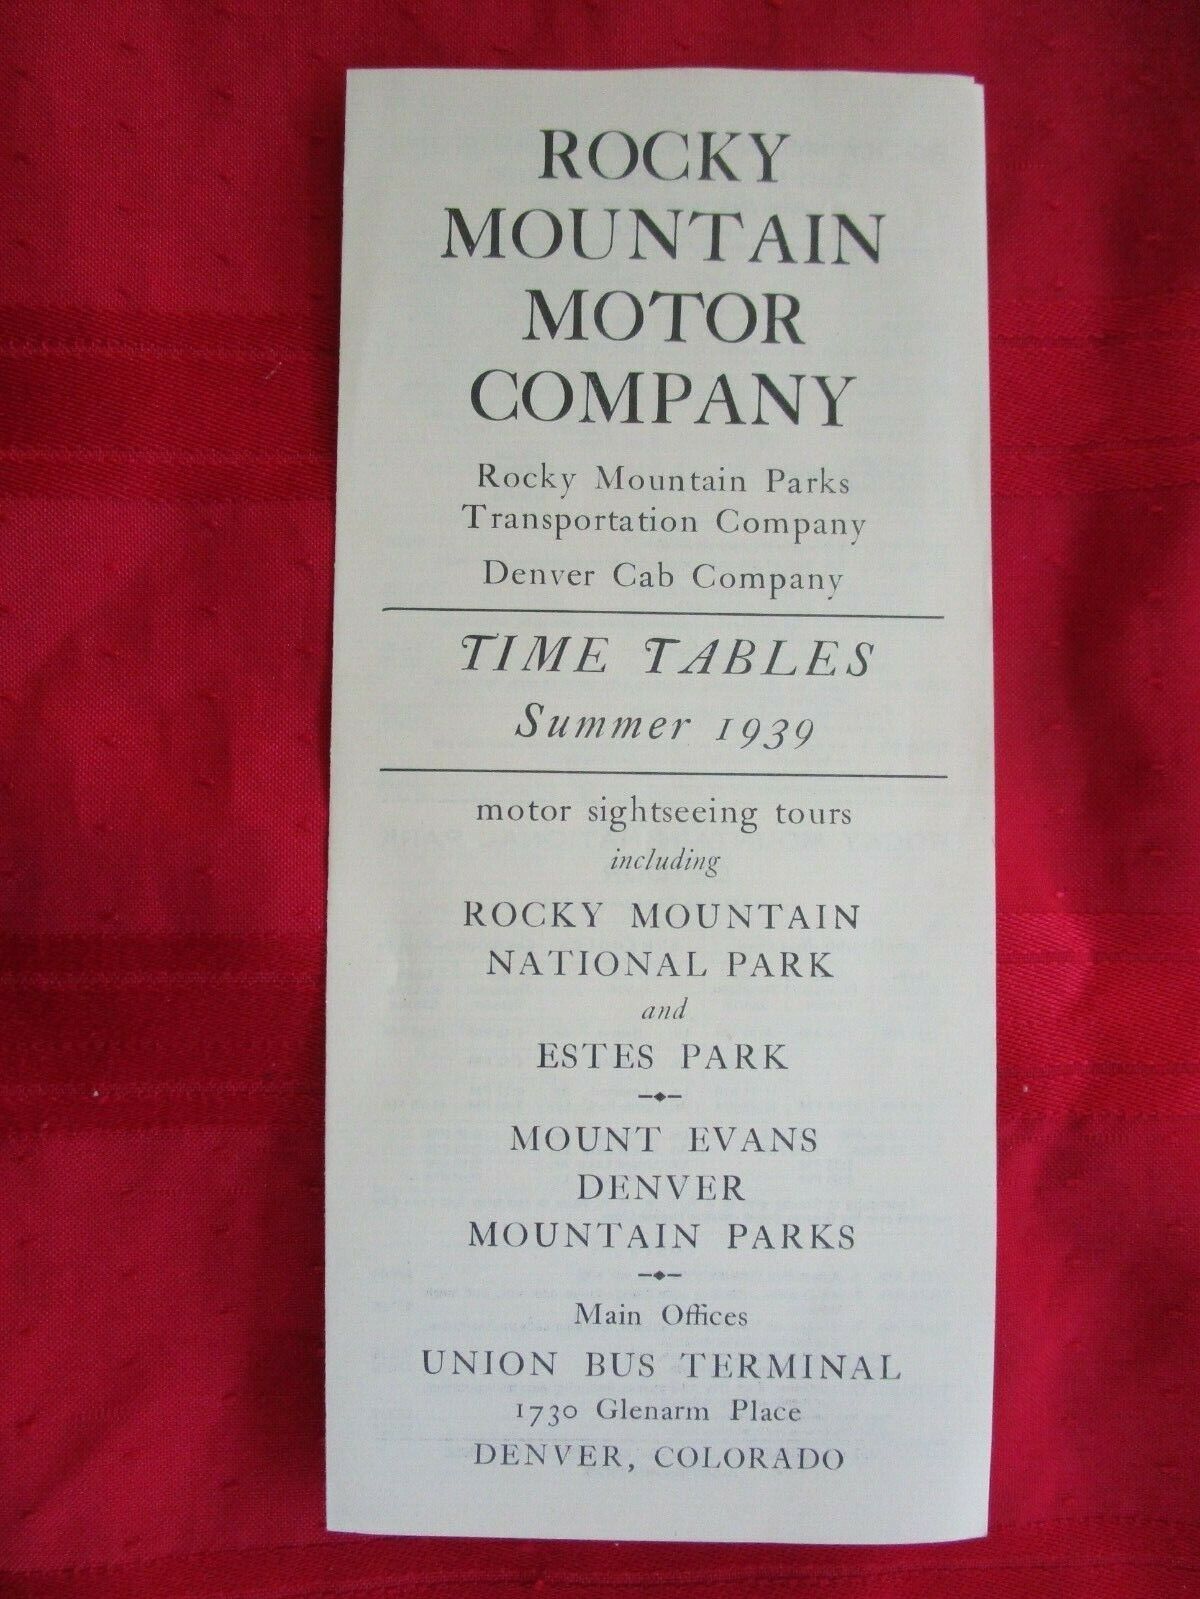 ROCKY MOUNTAIN MOTOR COMPANY - Time Table - Summer 1939